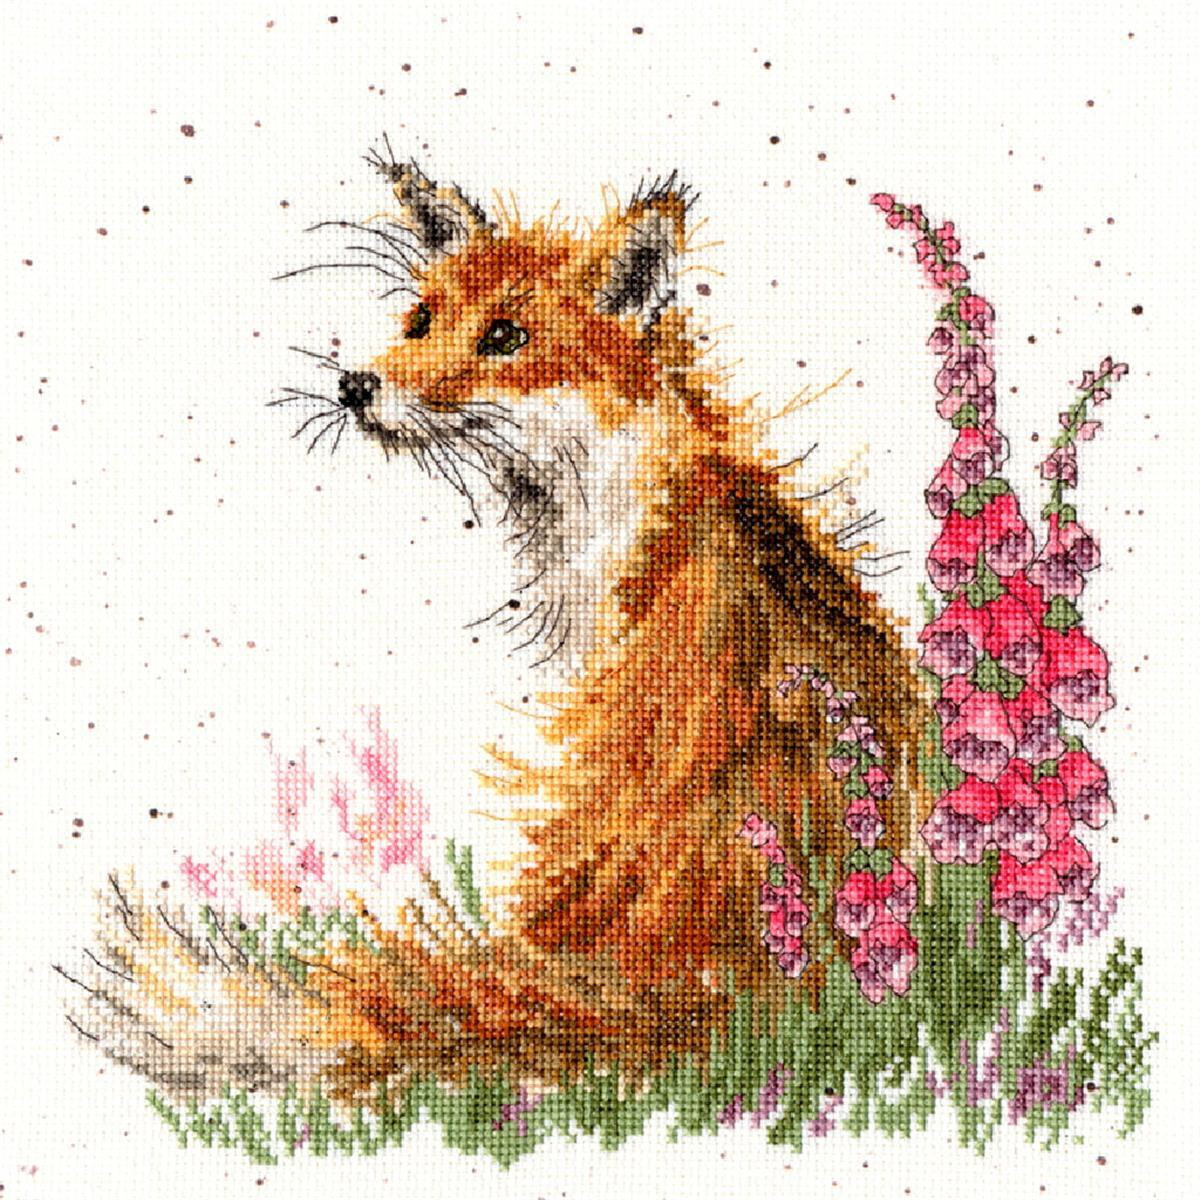 A cross stitch pattern from Bothy Threads embroidery kit...